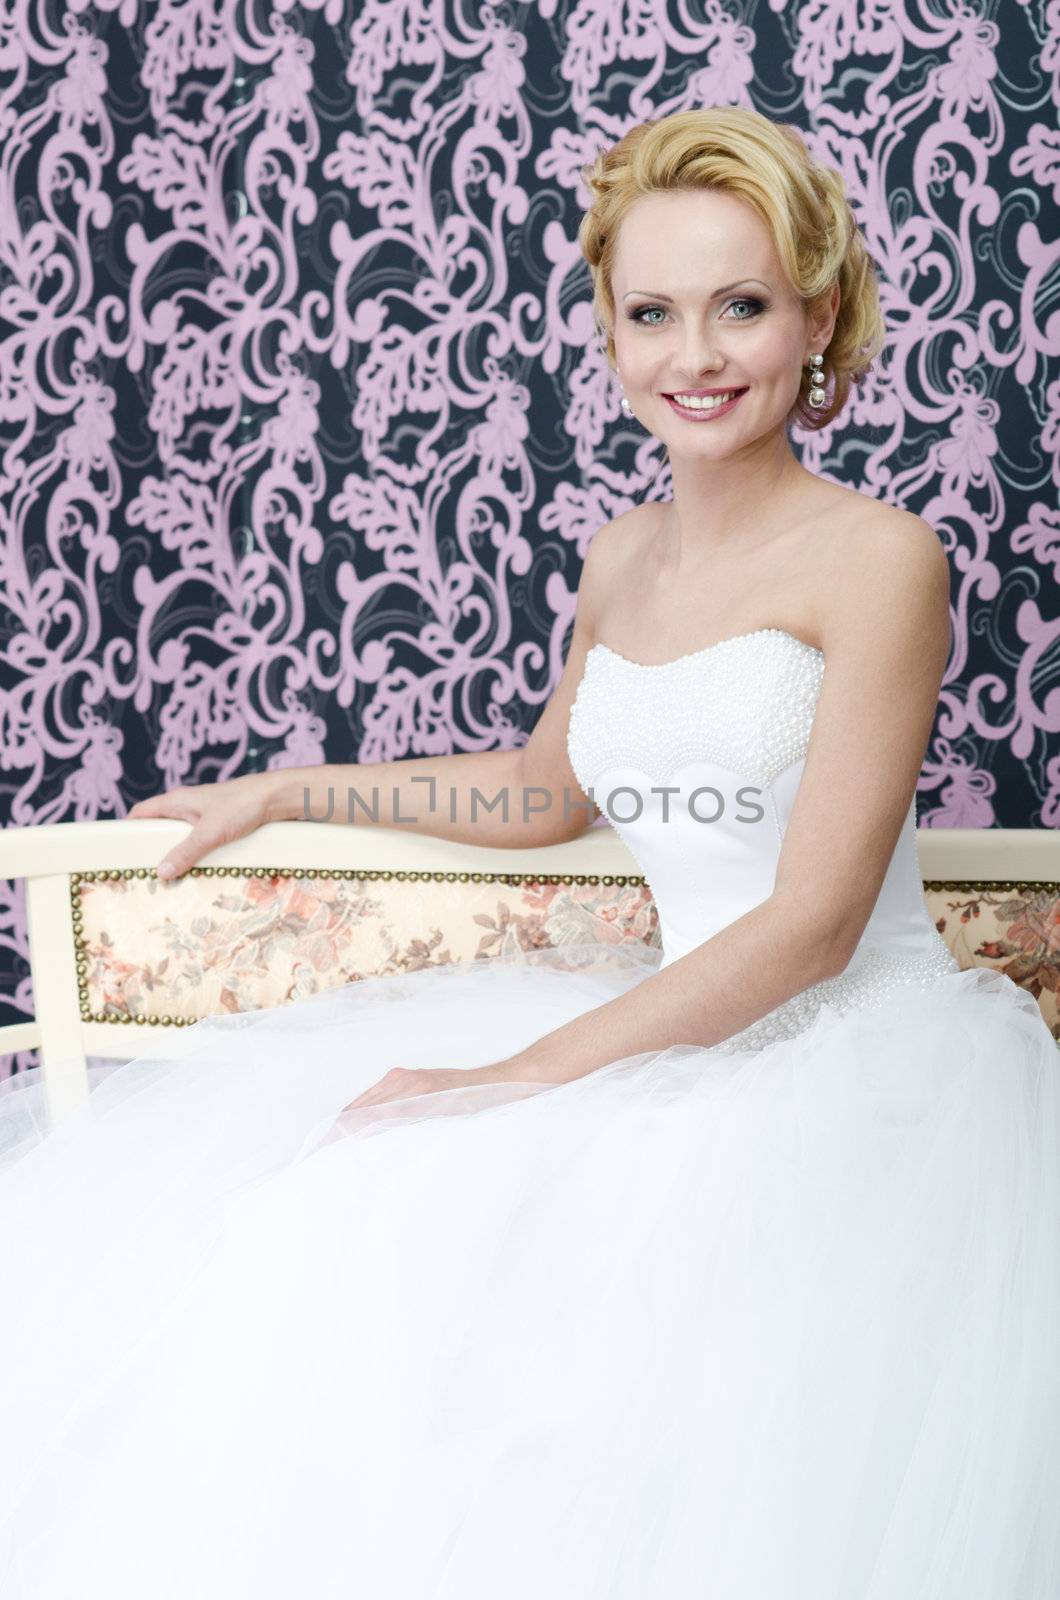 Studio shot of the young adult caucasian bride. She is sitting on the bench with smile on her face